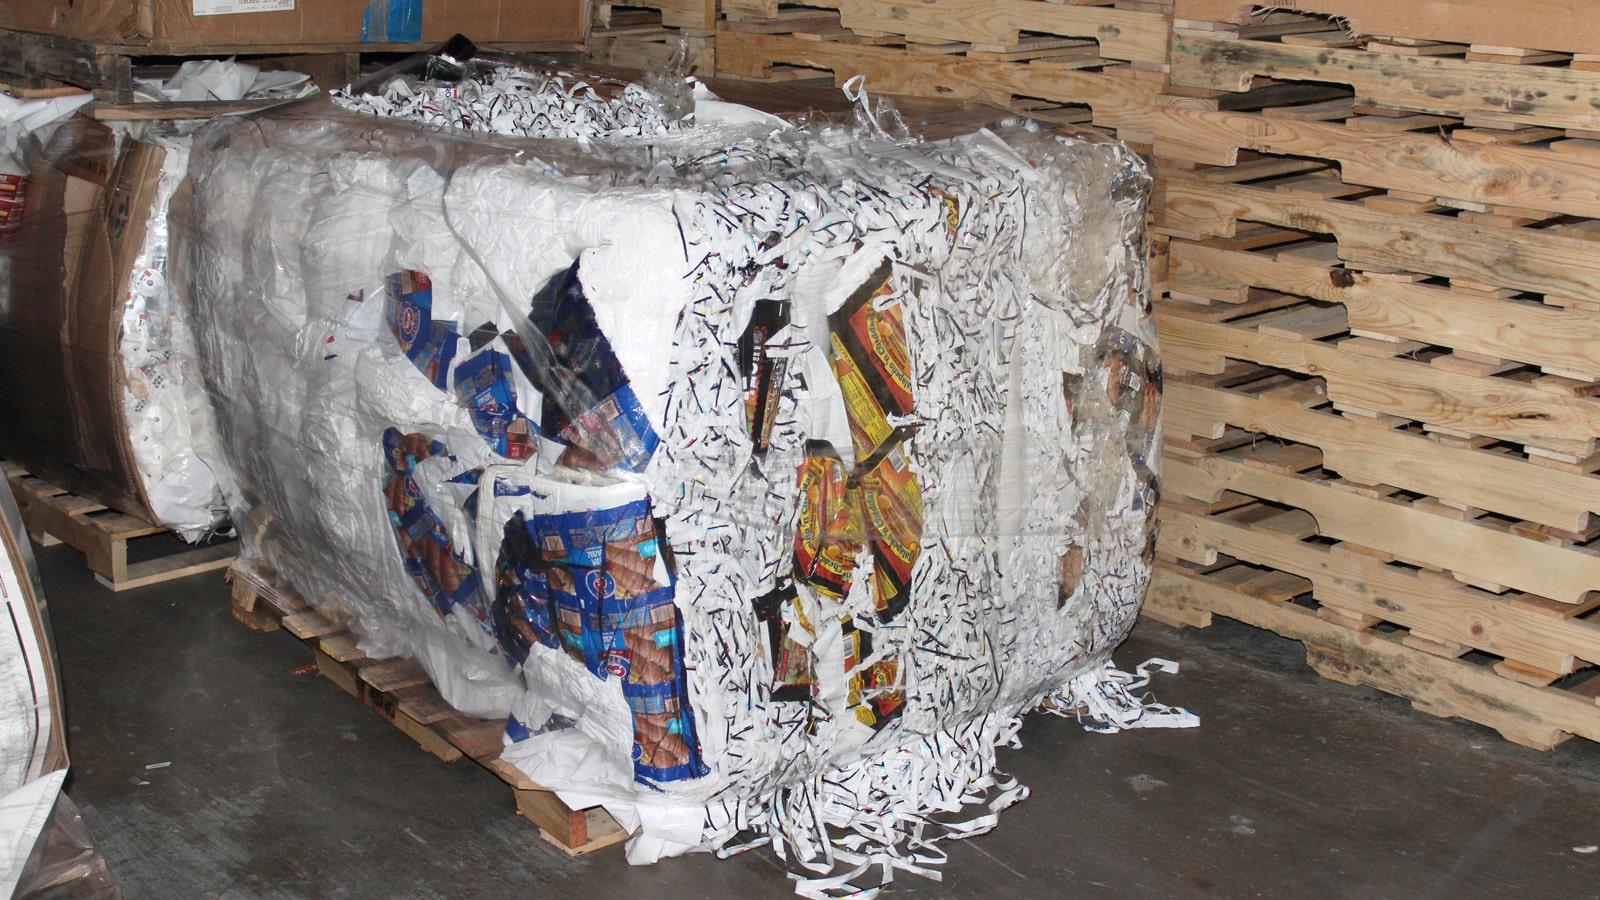 Compacted bale of shredded plastic placed on a pallet